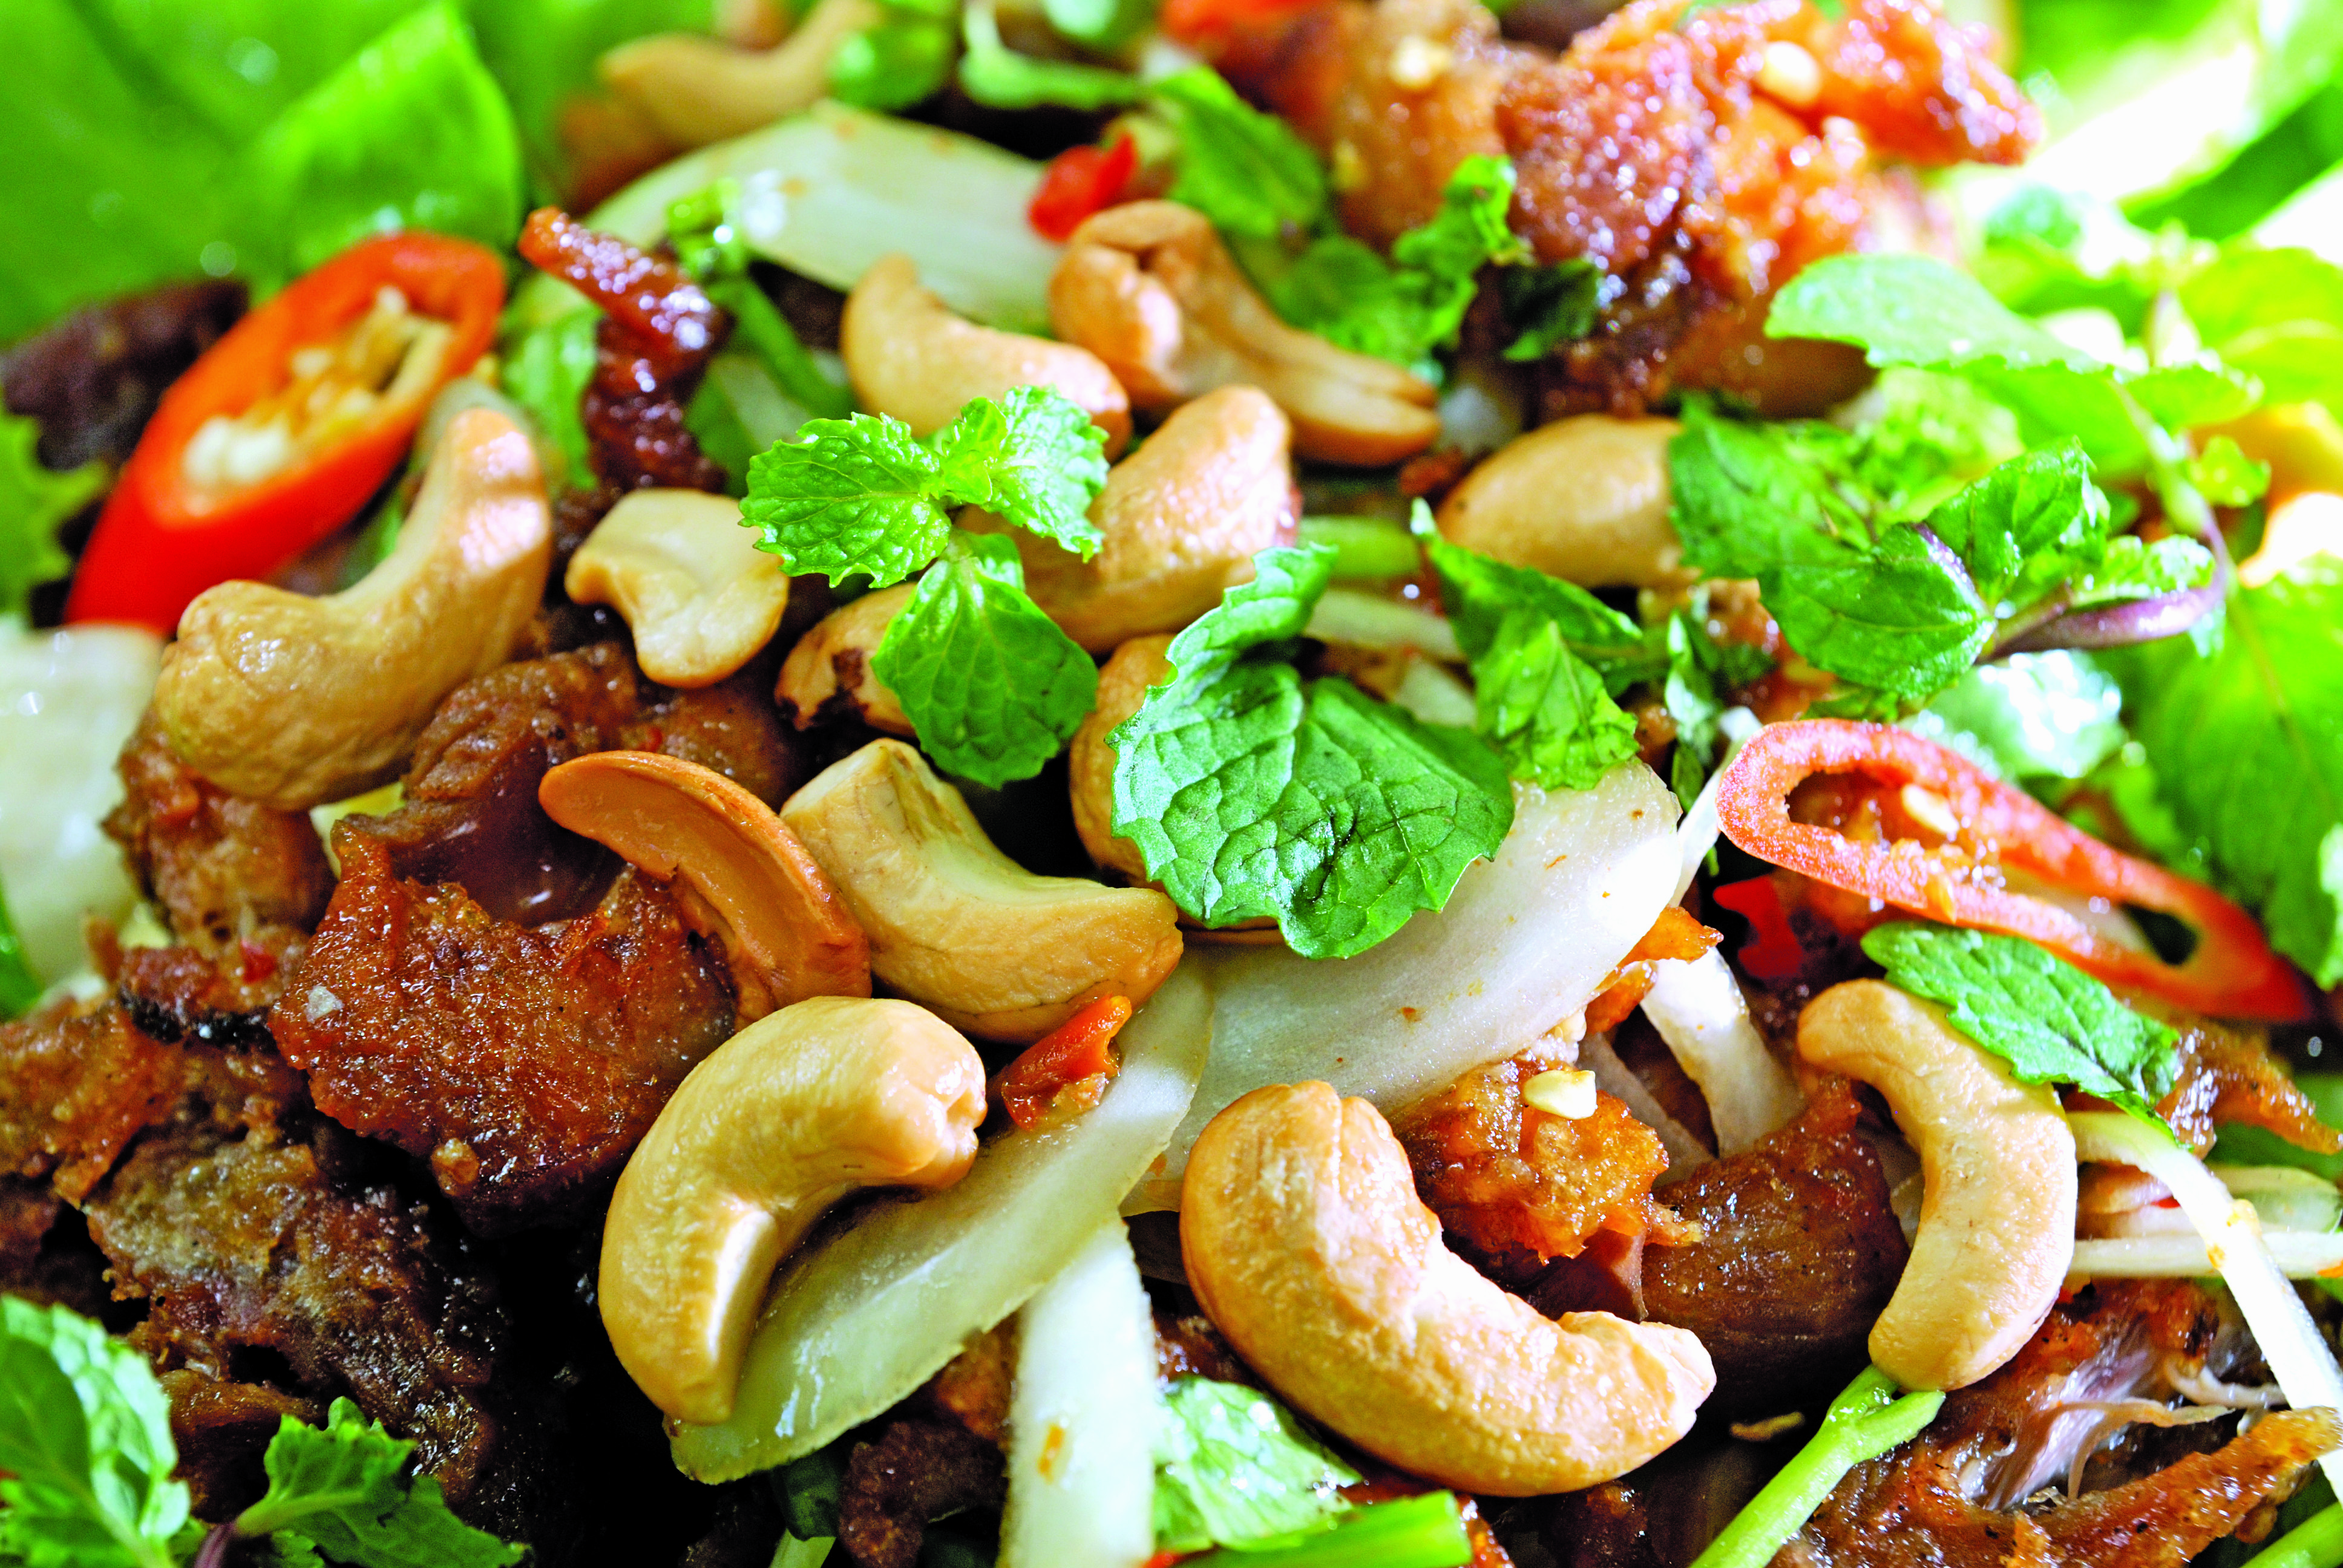 One ingredient: Five ways to use cashew nuts